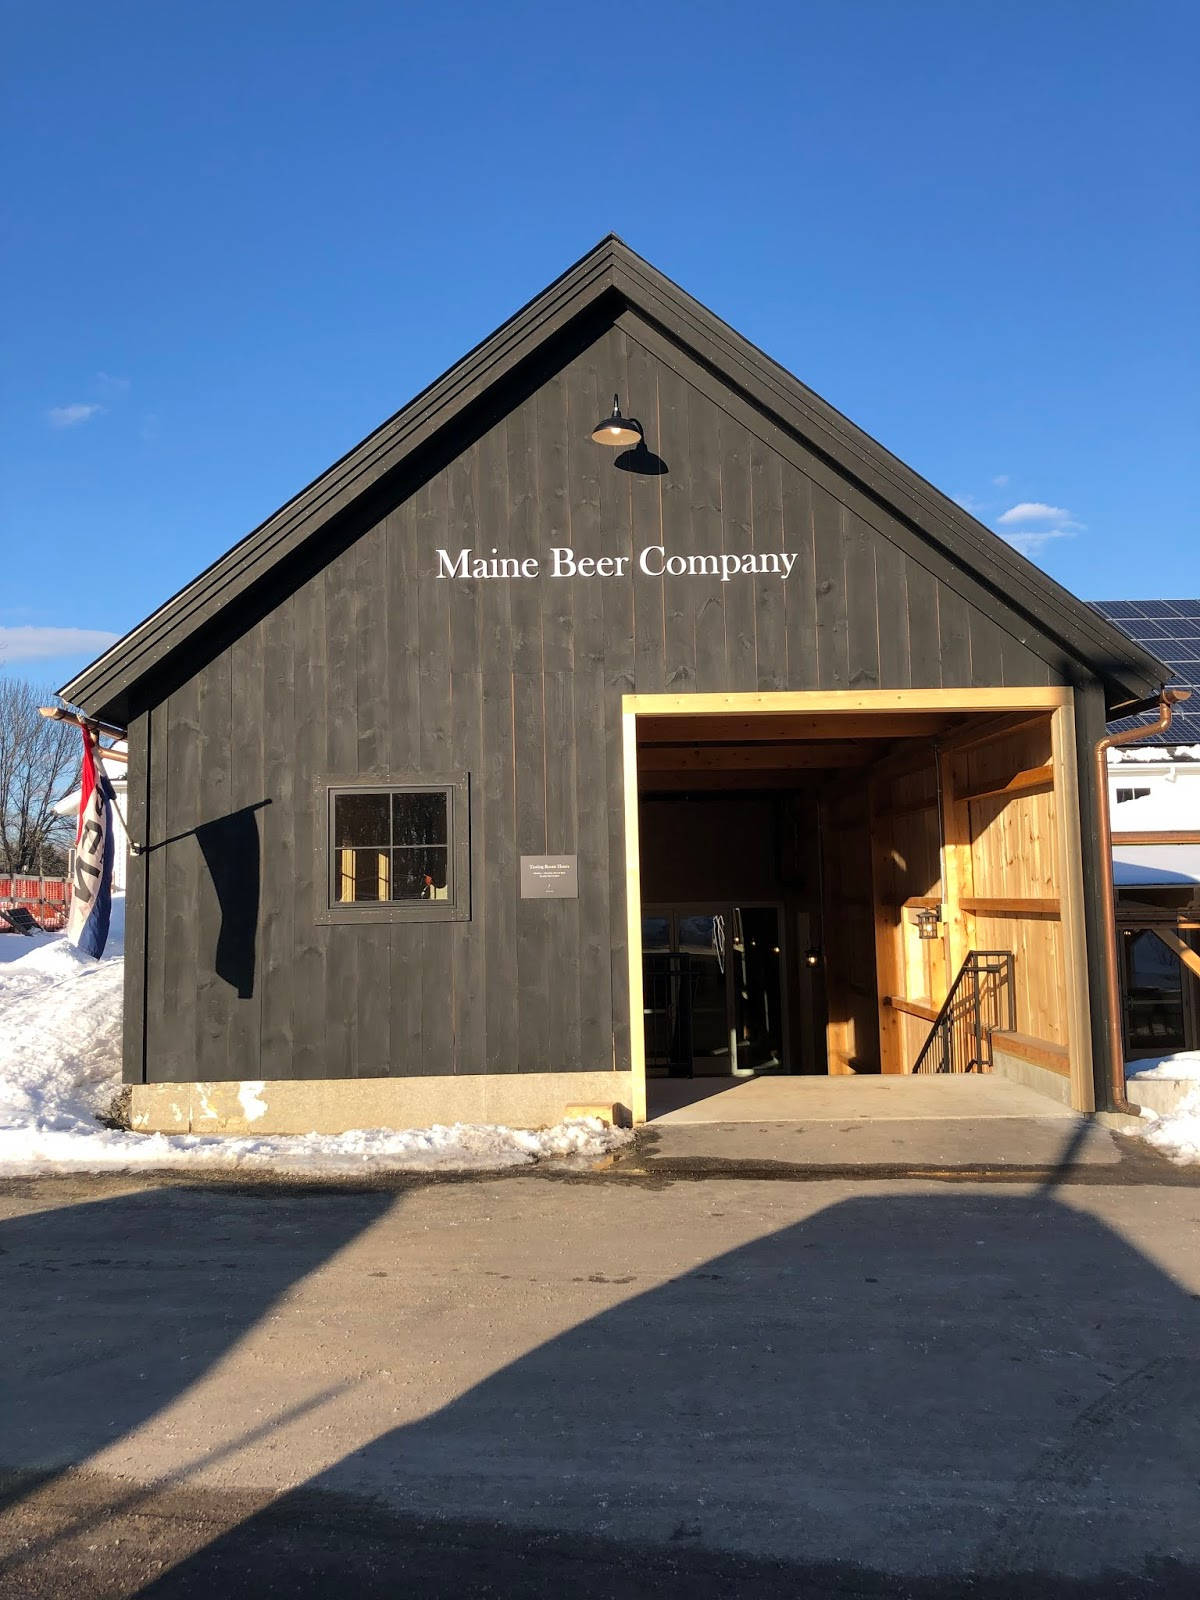 Caption: Majestic Front View of Maine Beer Company Brewery Wallpaper